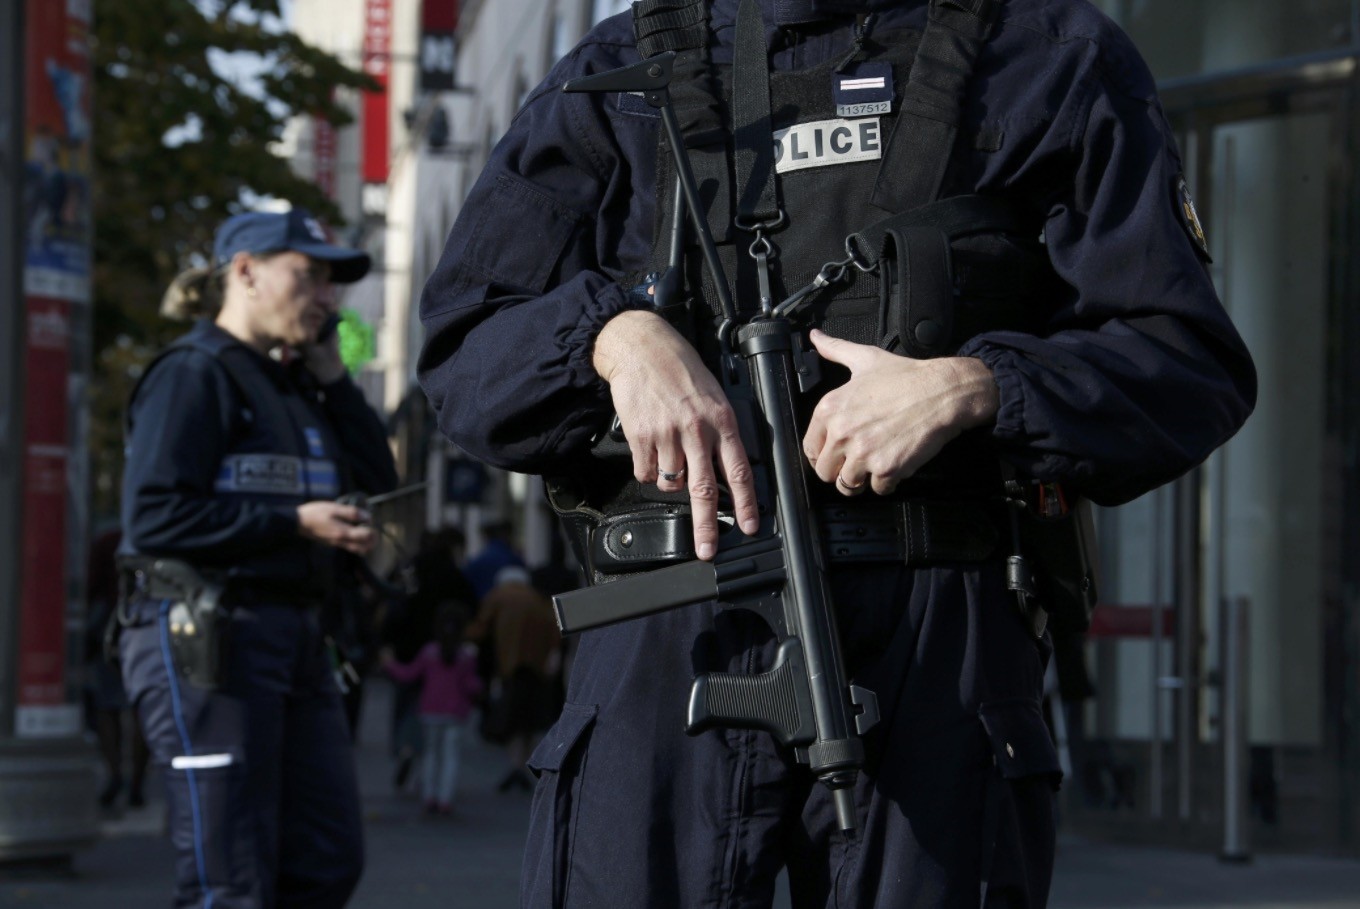 French police standing guard outside of a commercial center (Reuters Photo)